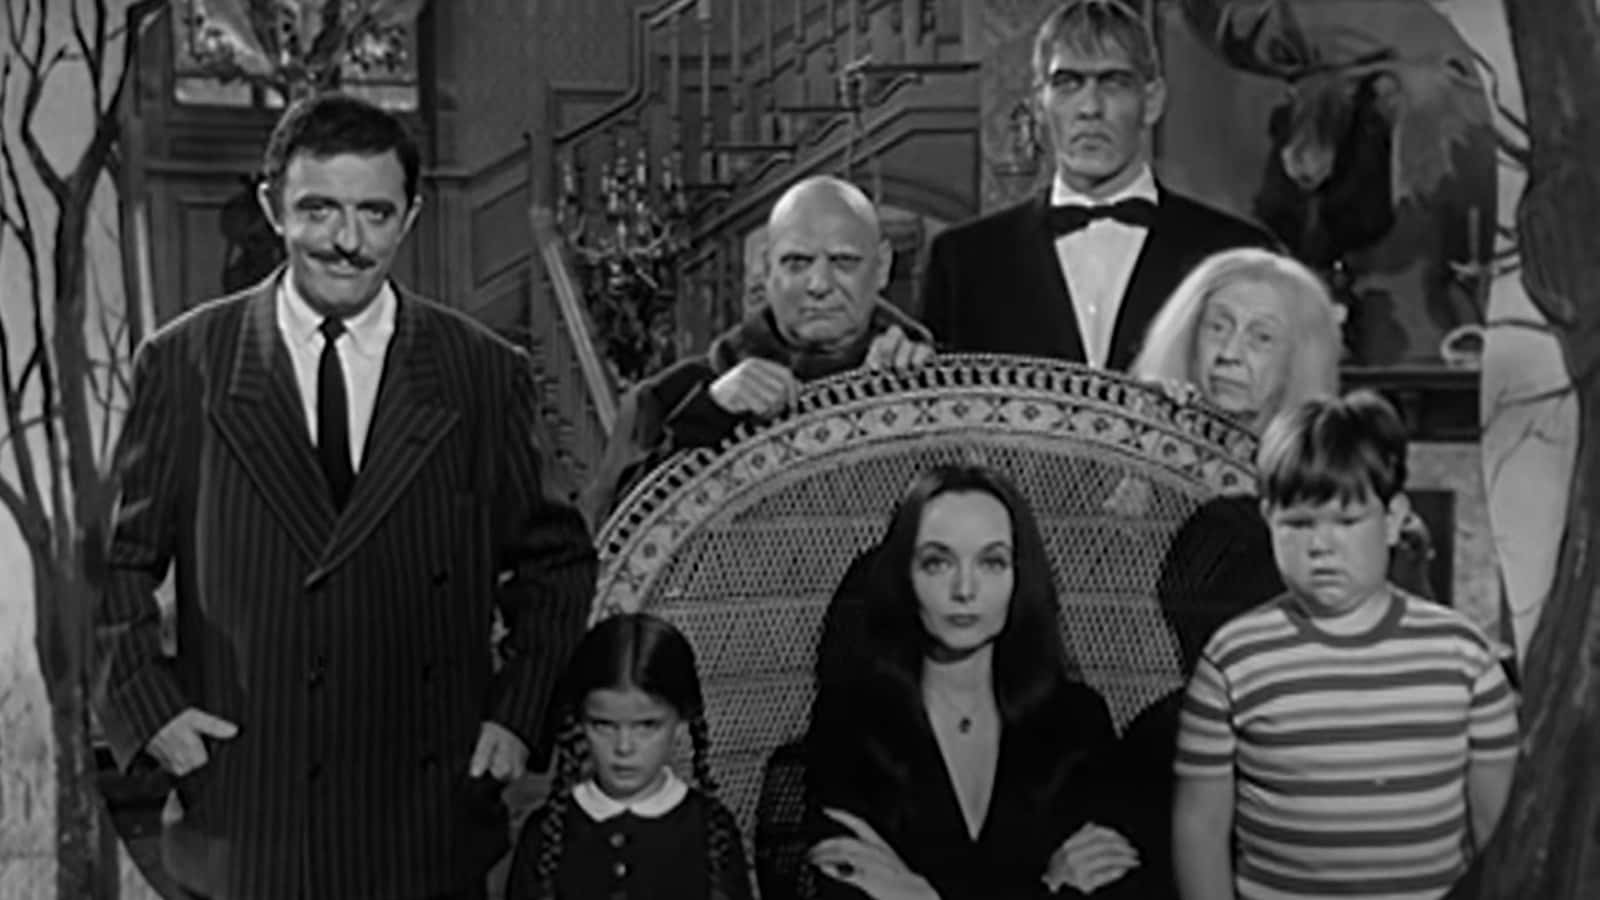 "The Addams Family - A Fun and Interesting Haunting"